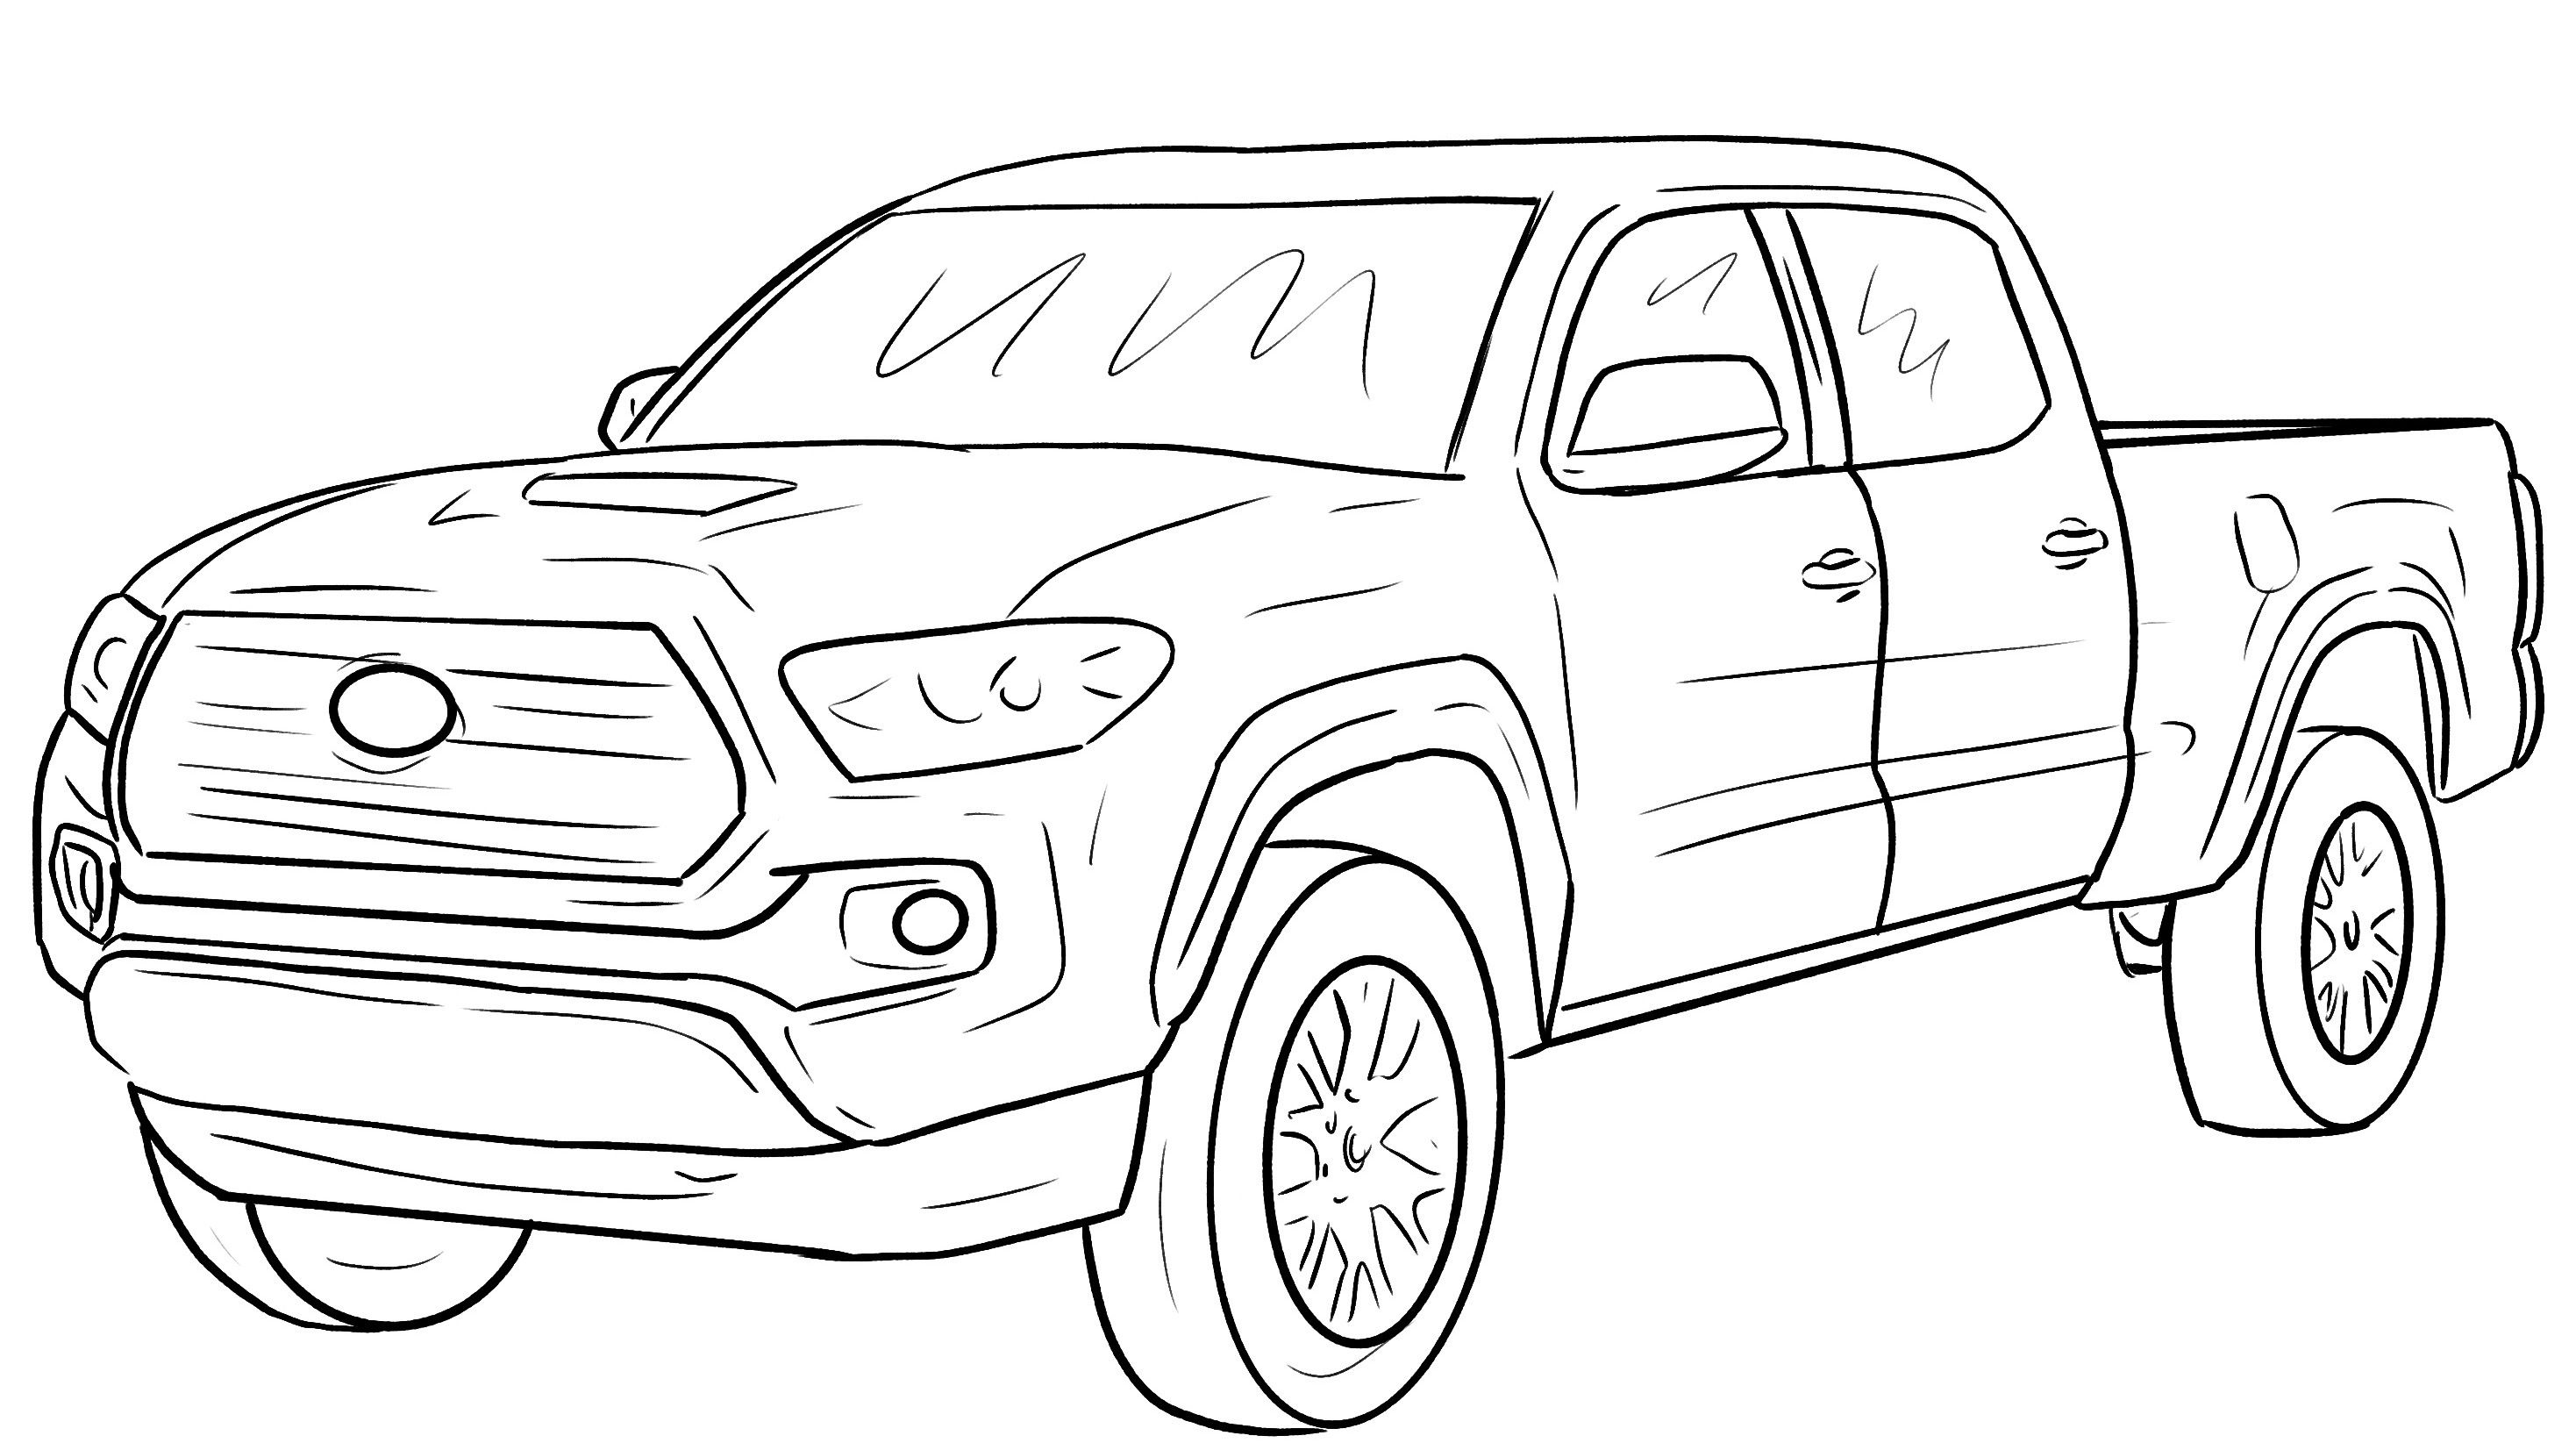 toyota pickup truck coloring pages